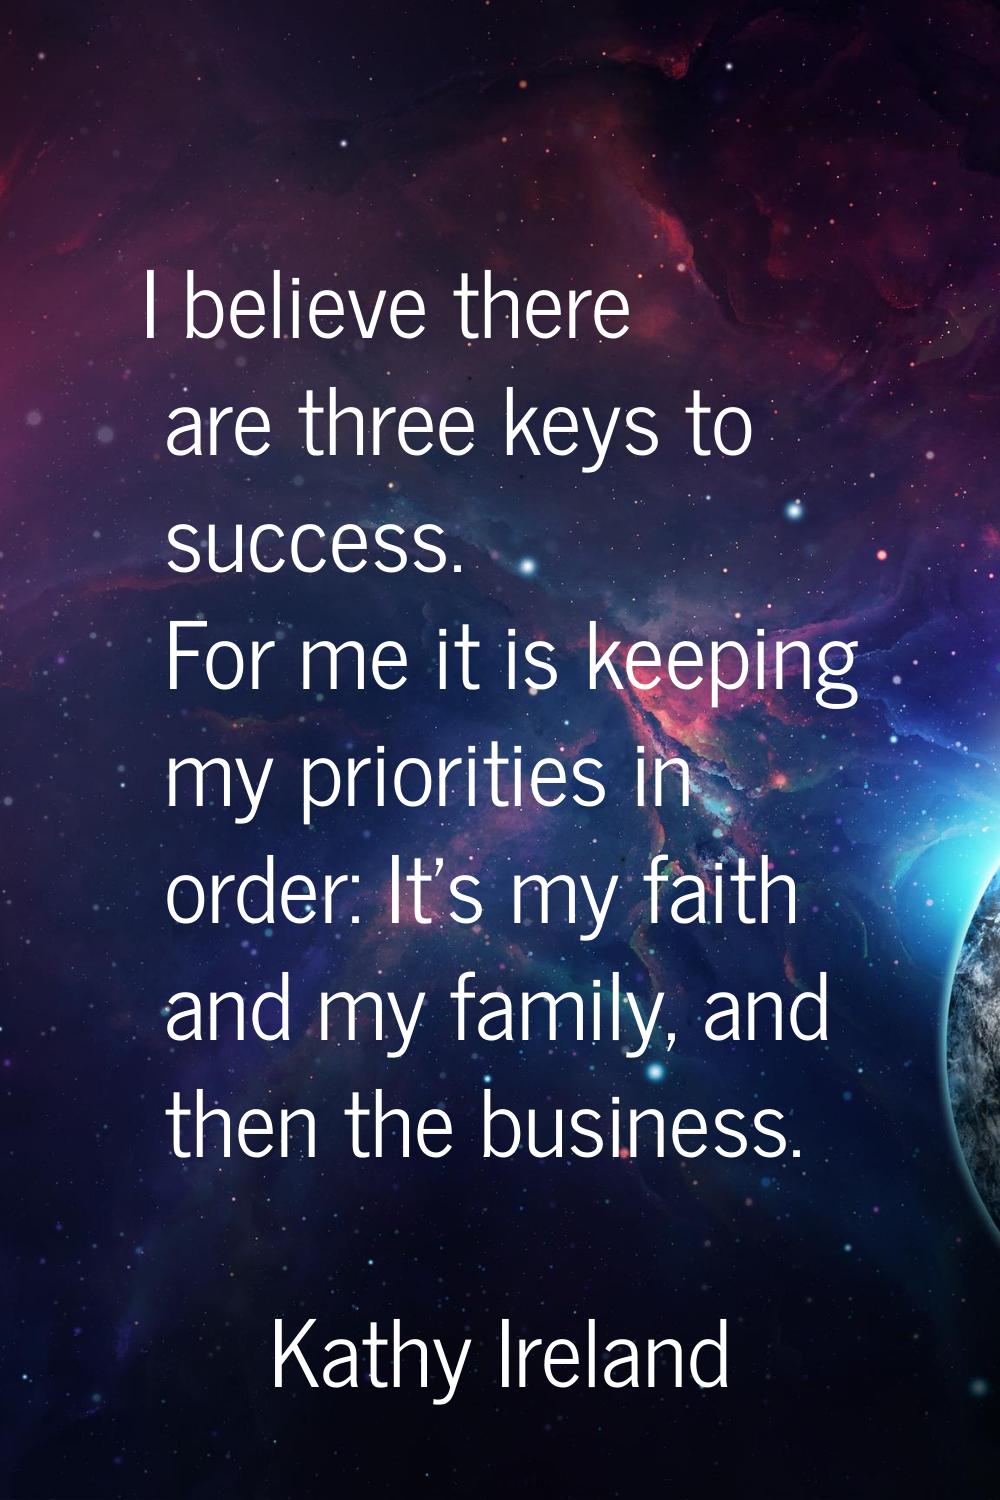 I believe there are three keys to success. For me it is keeping my priorities in order: It's my fai